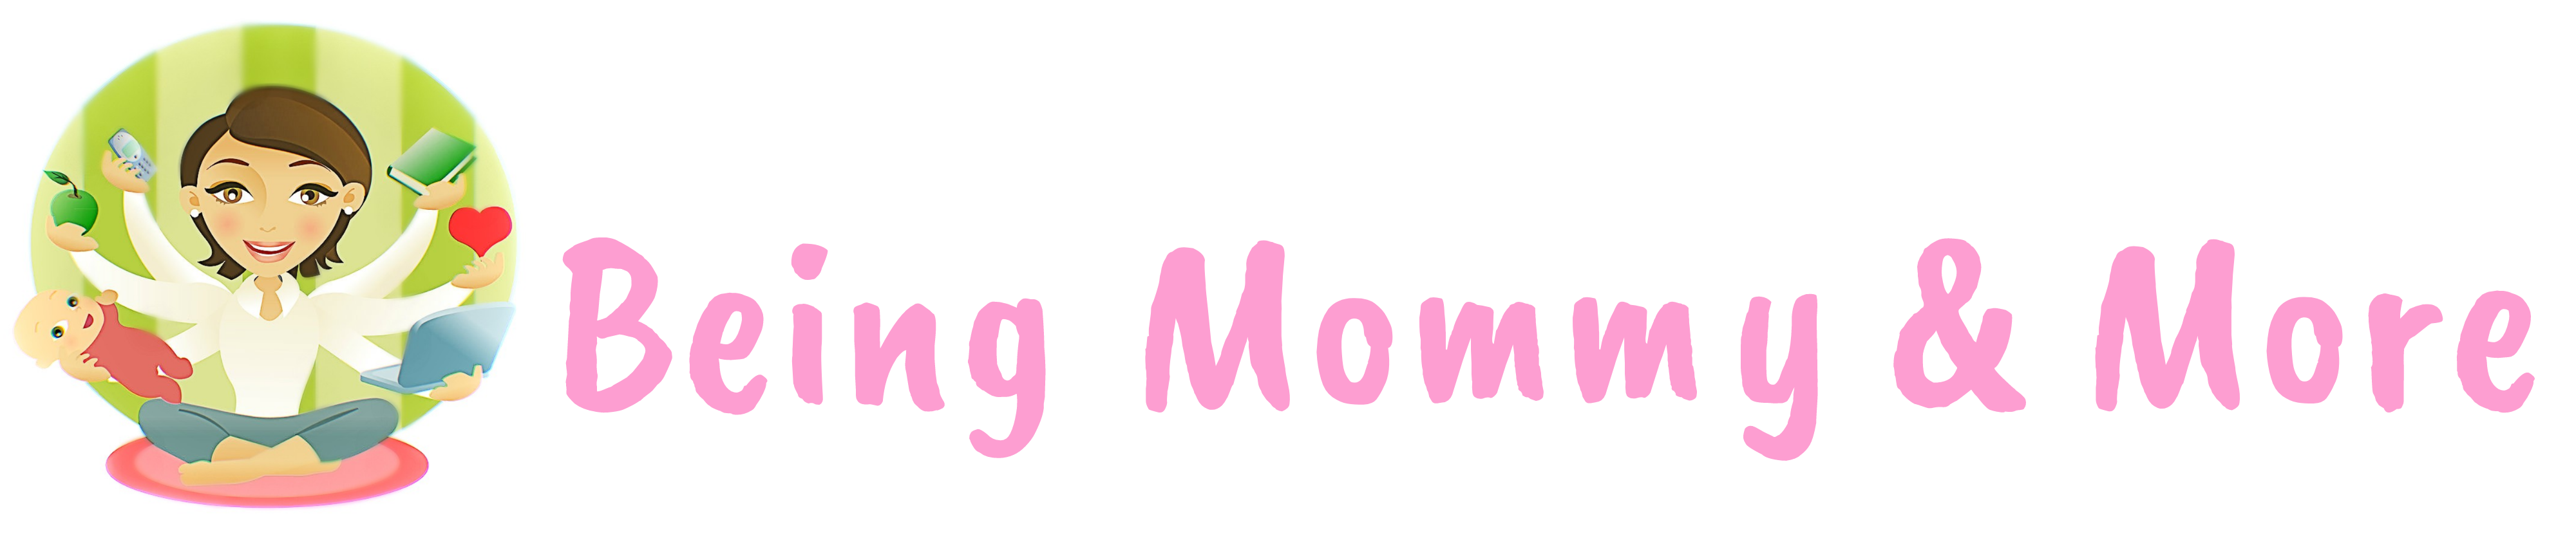 Being Mommy & More